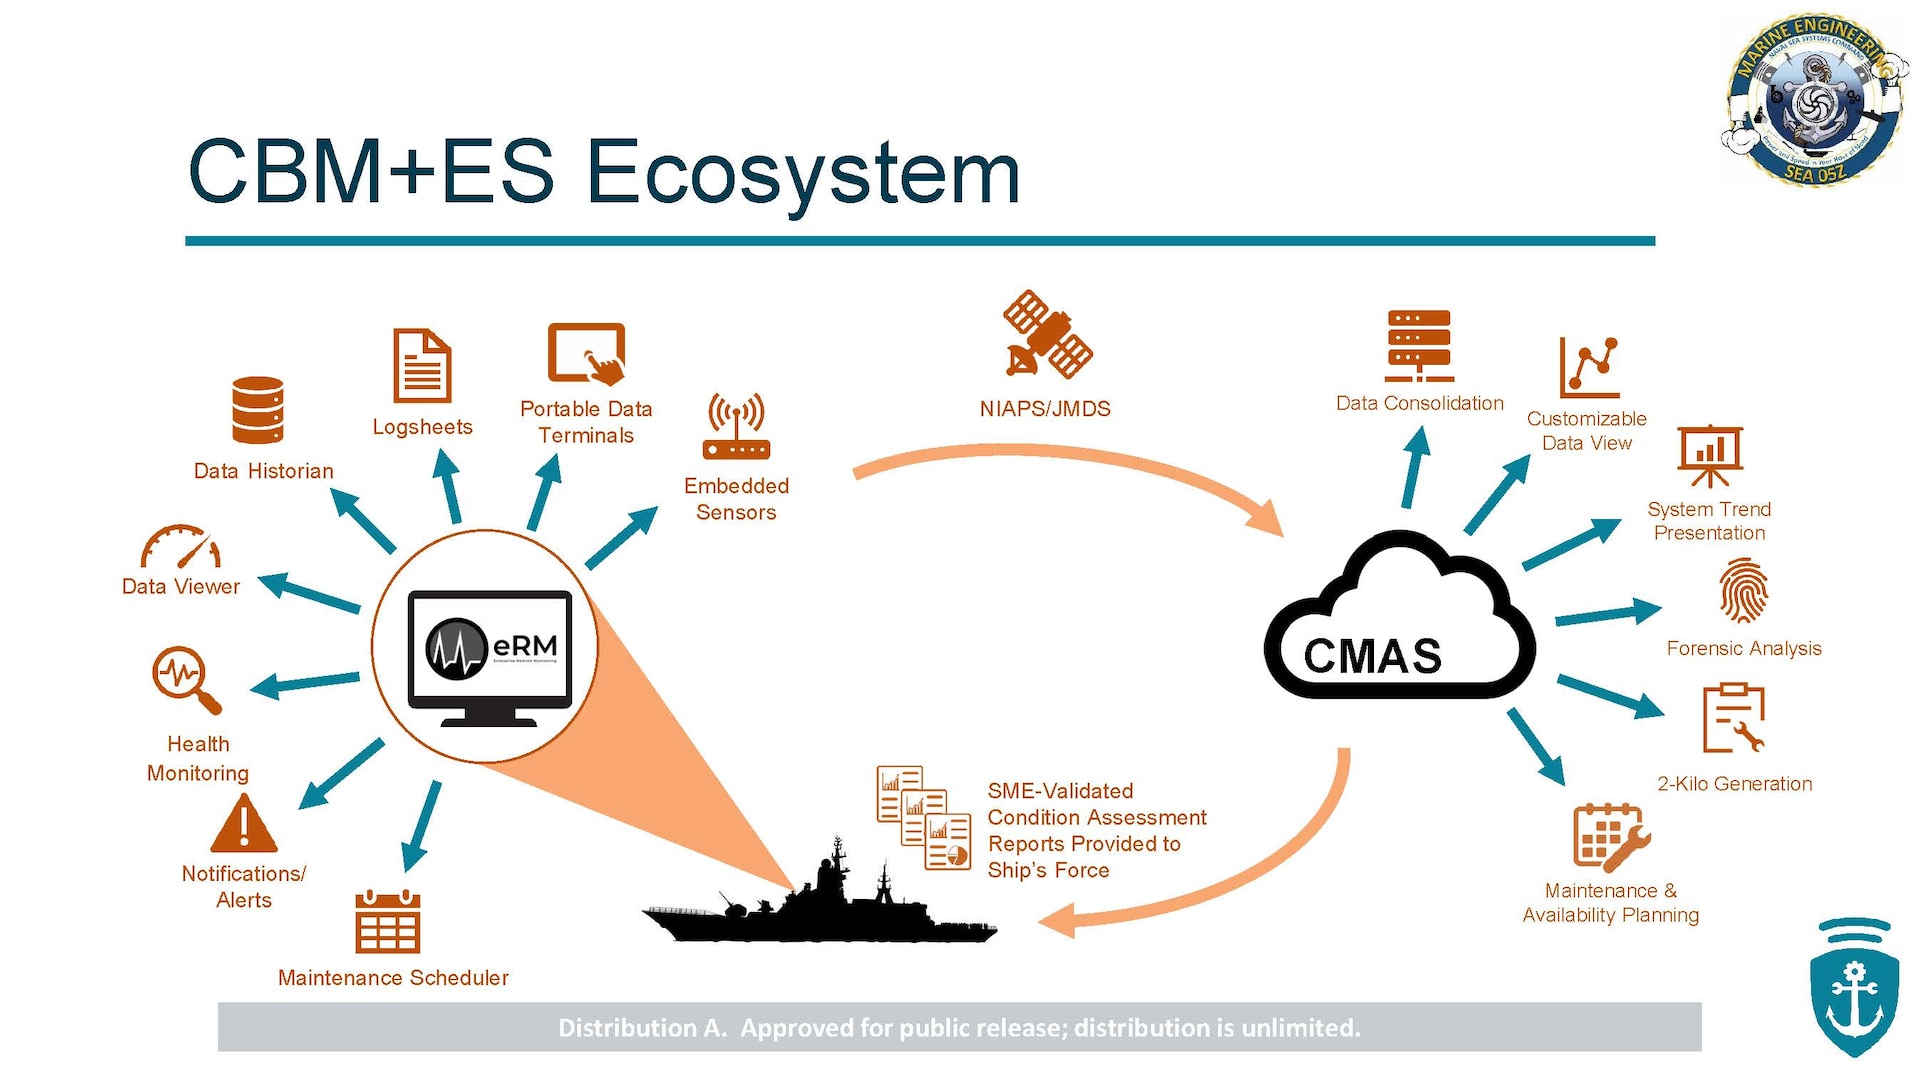 NSWCPD’s Mathias Haegele and Sonia Selvan presented a CBM+ES Technical Overview at the CBM+ Expo in September, including this slide showing the CBM+ES Ecosystem. (U.S. Navy Graphic/Released)